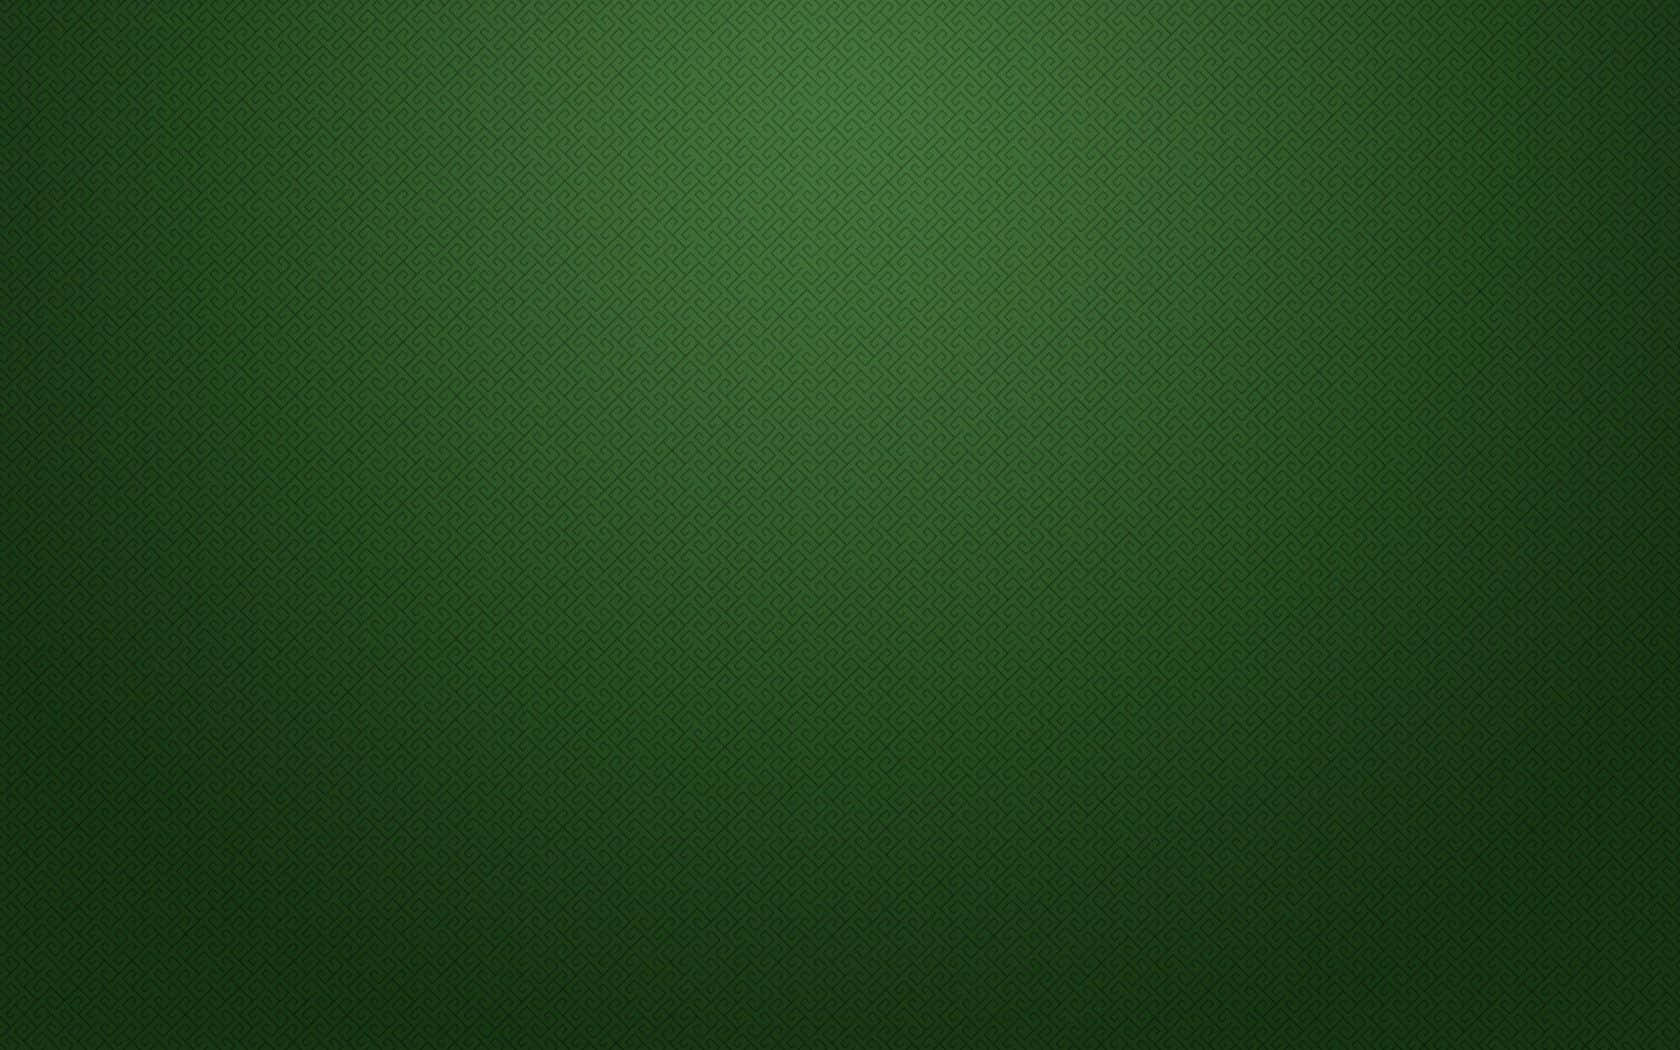 Vibrant & Rich Solid Green Background